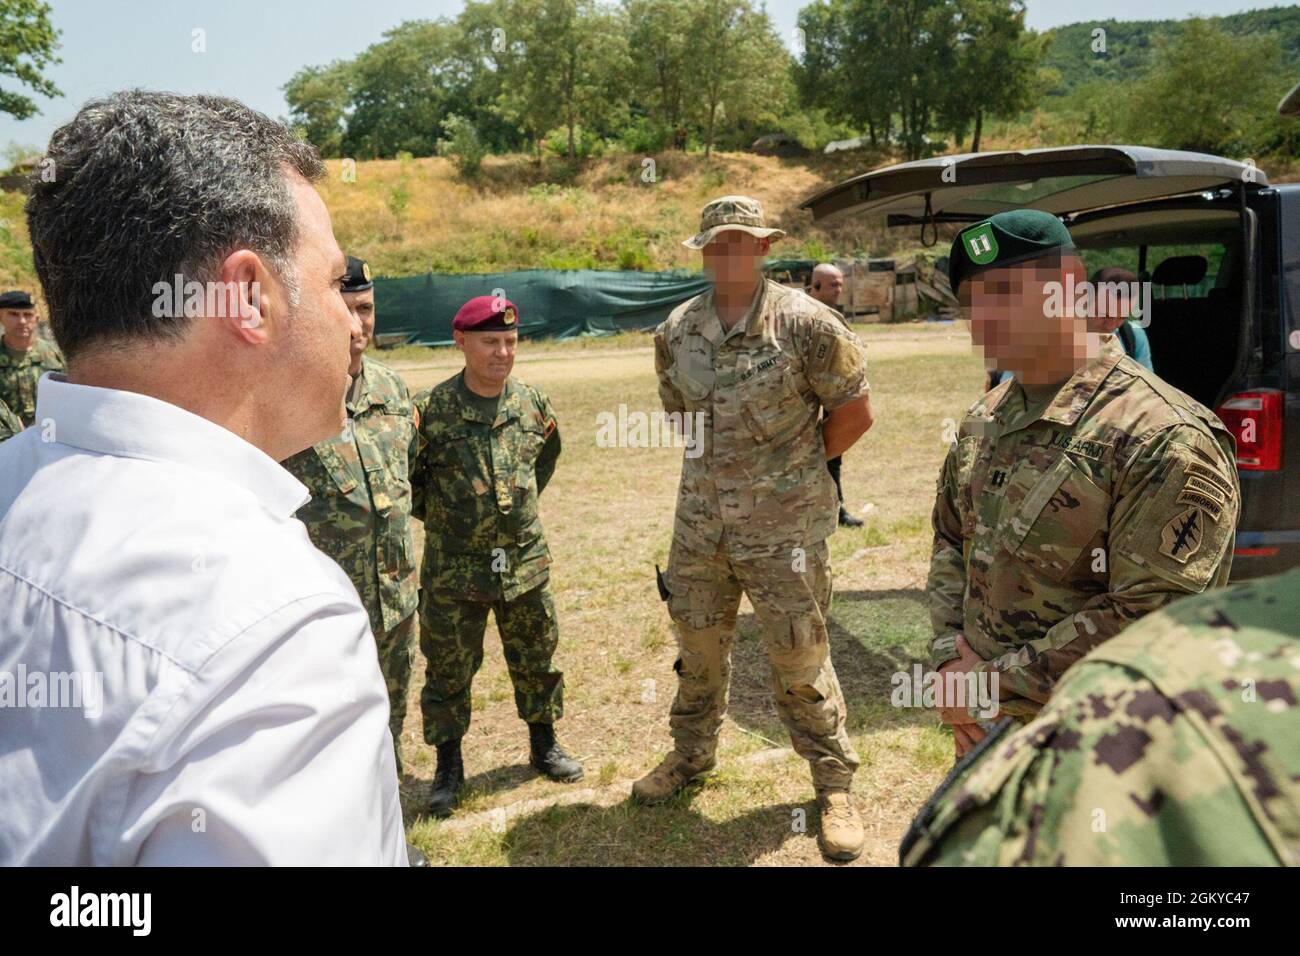 Minister of Defense for the Republic of Albania, Niko Peleshi, observes the  Joint Combined Exchange Training between U.S. Army Green Berets and  Albanian Special Forces, Albania, July 27, 2021. Joint Combined Exchange